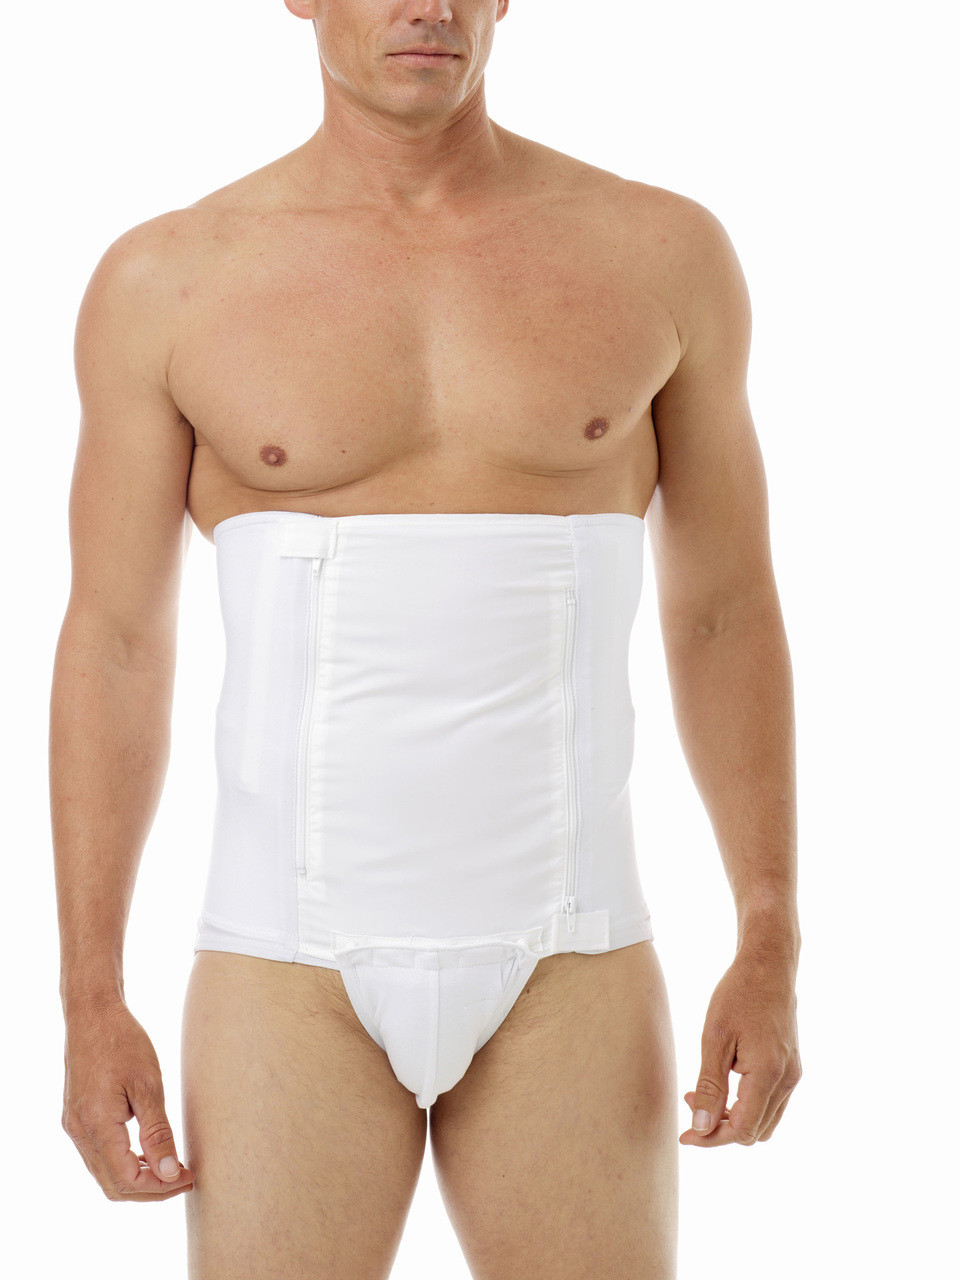 Suportx Male Hernia Support Girdles Briefs Large High Waisted 104